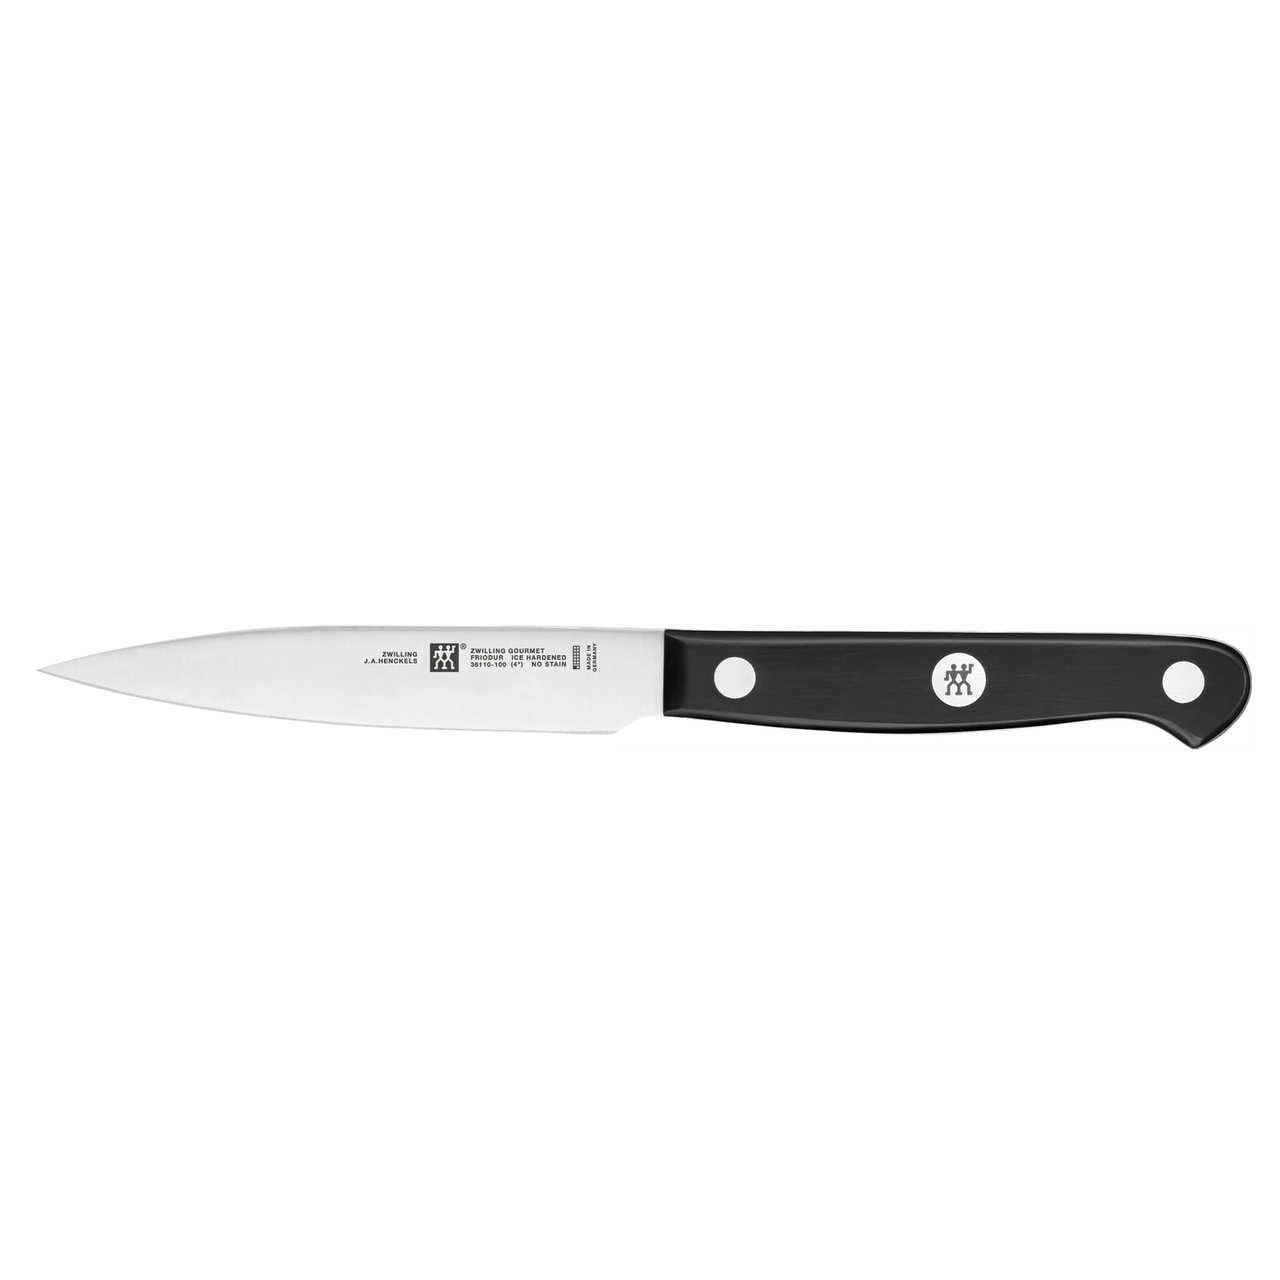 https://cdn11.bigcommerce.com/s-hccytny0od/images/stencil/1280x1280/products/1614/5664/zwilling-gourmet-paring-knife__72962.1532175288.jpg?c=2?imbypass=on